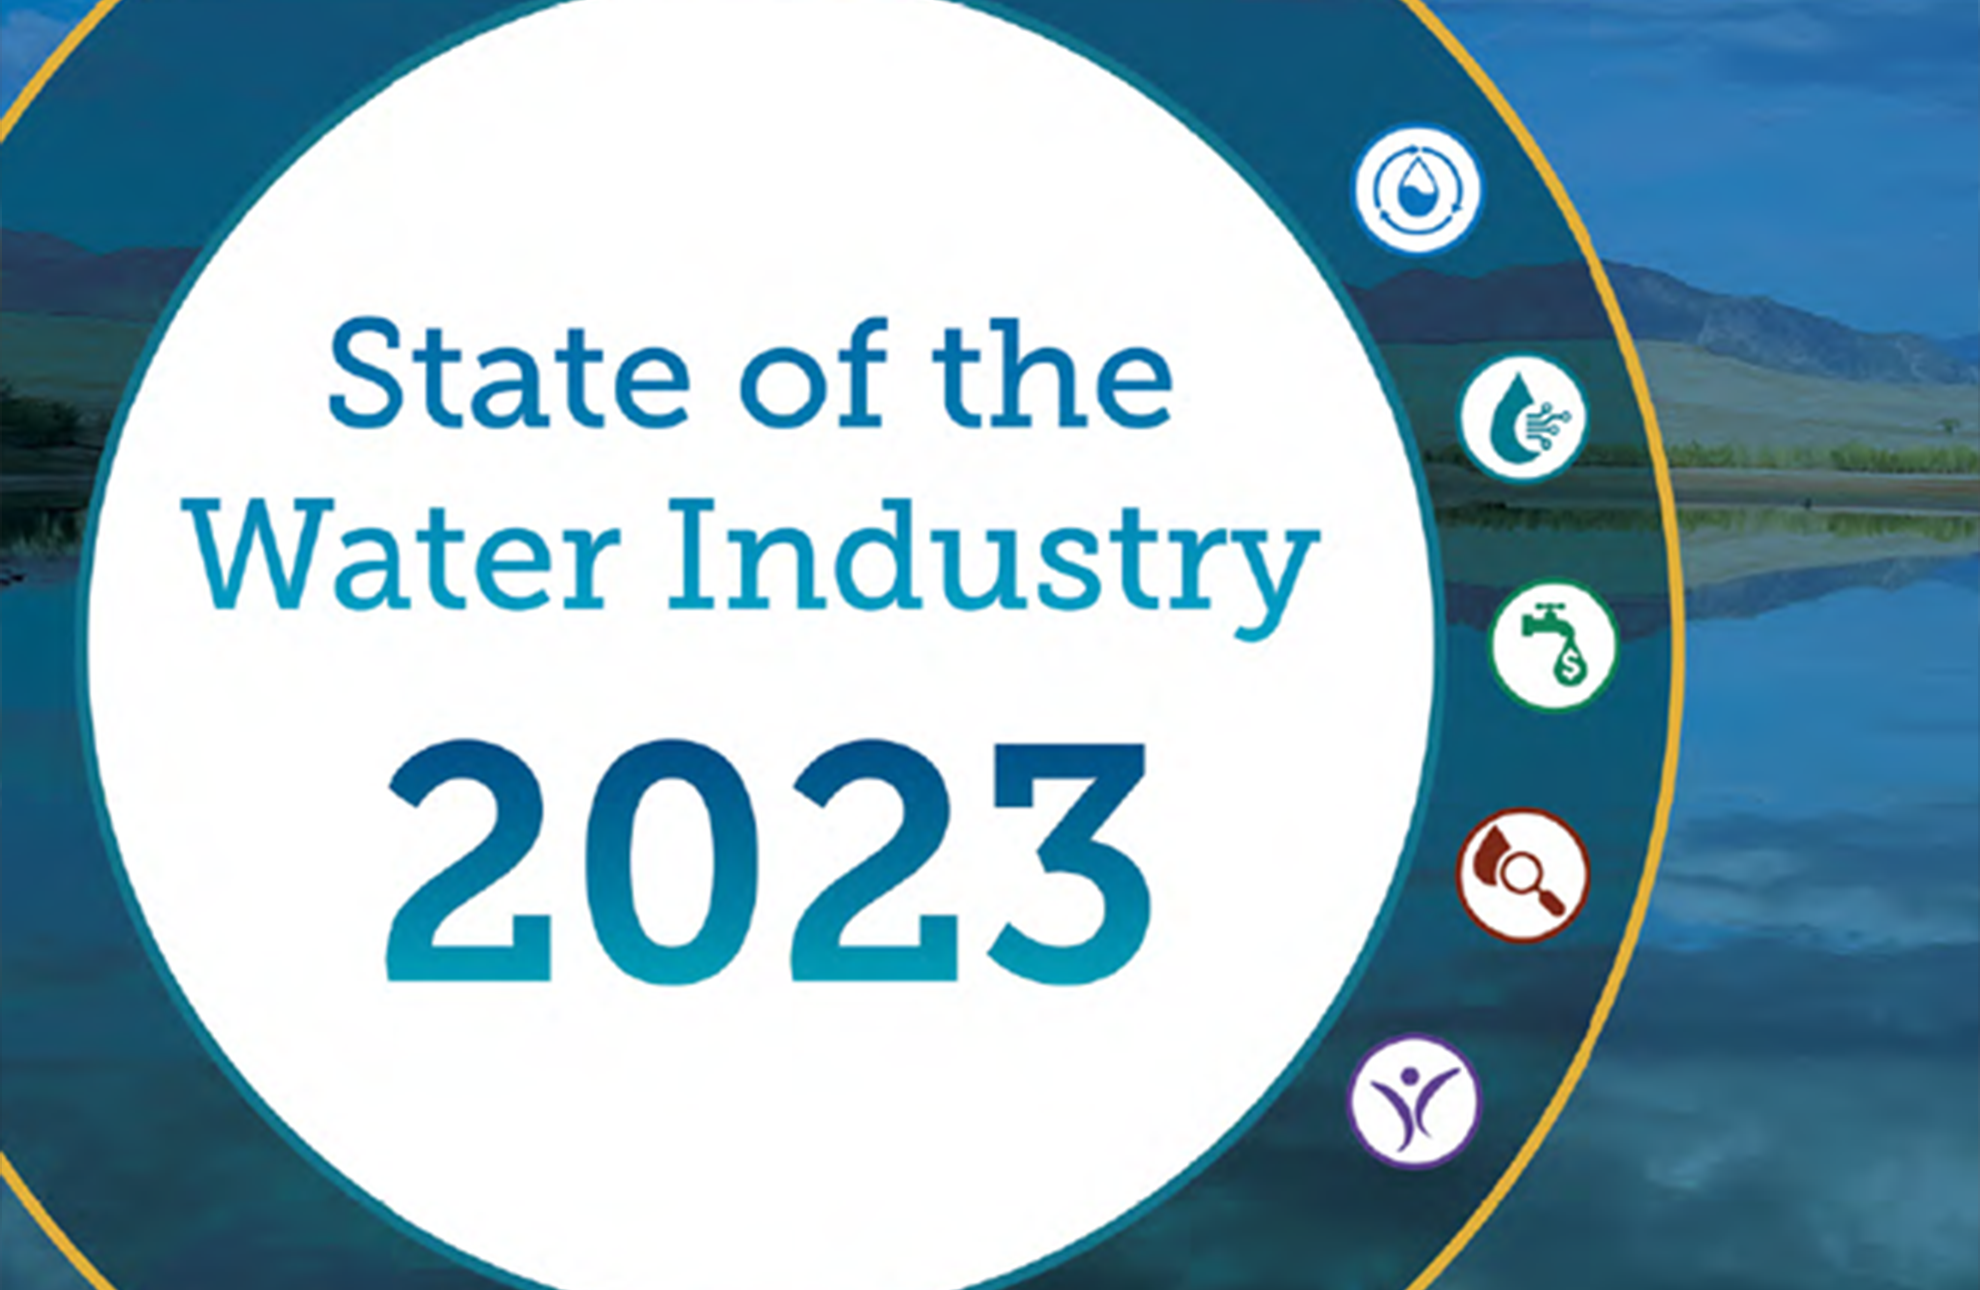 AWWA 2023 State of the Water Industry Performance Services, Inc.